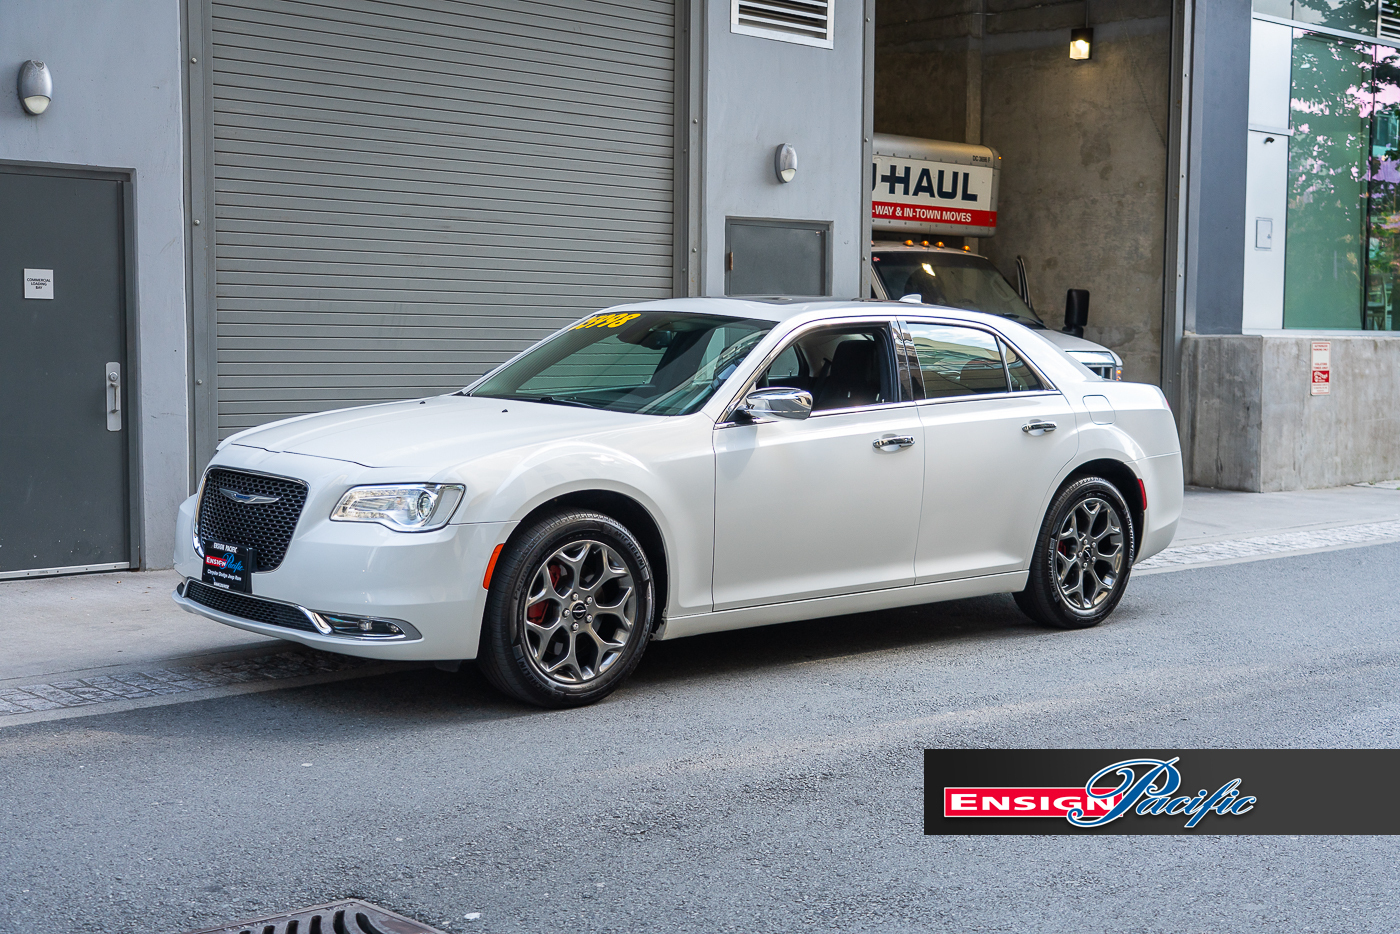 2018 Chrysler 300 Limited 300 Limited AWD